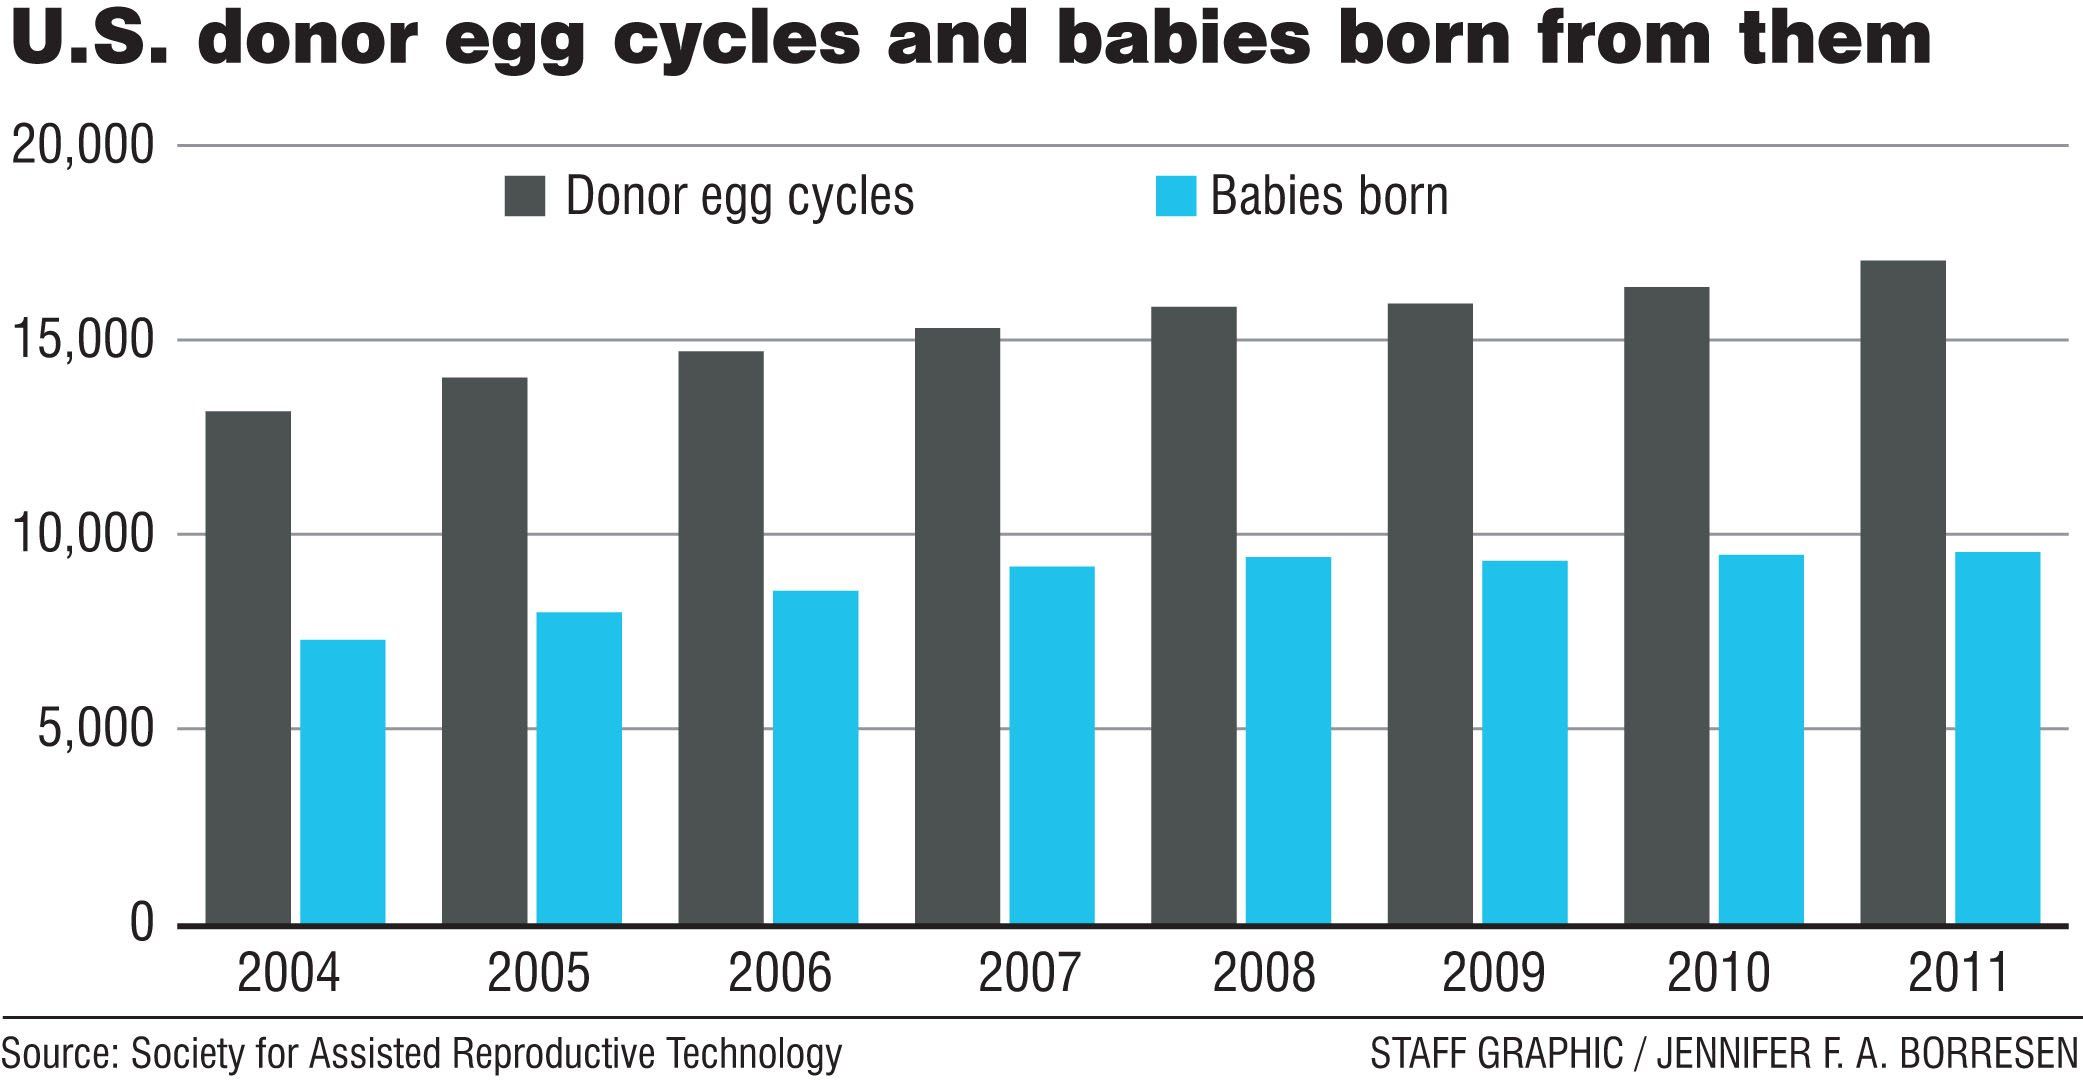 History about egg and sperm donations